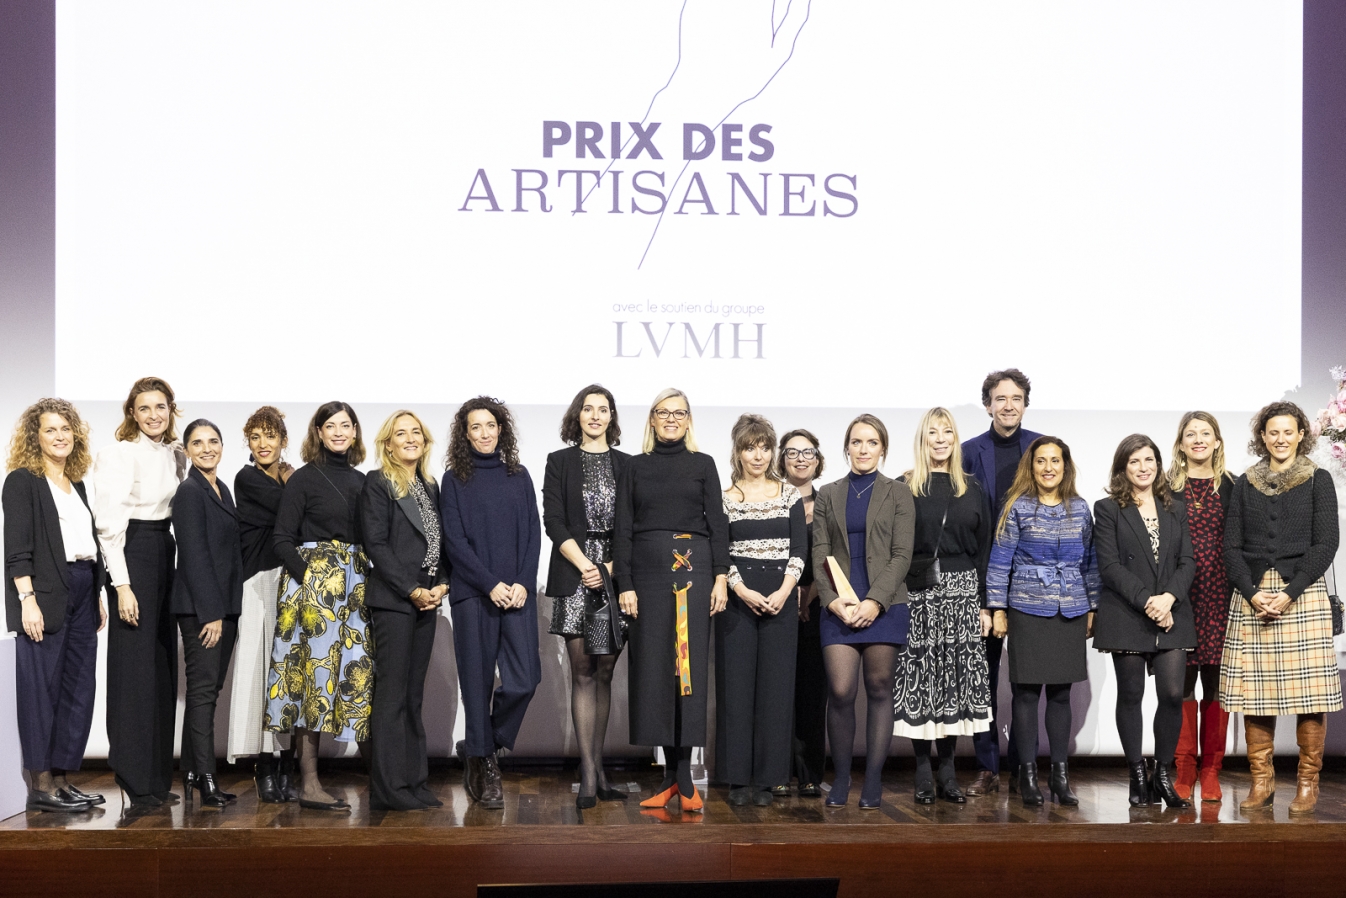 ELLE and LVMH announce the four winners of Prix des Artisanes 2nd edition -  LVMH